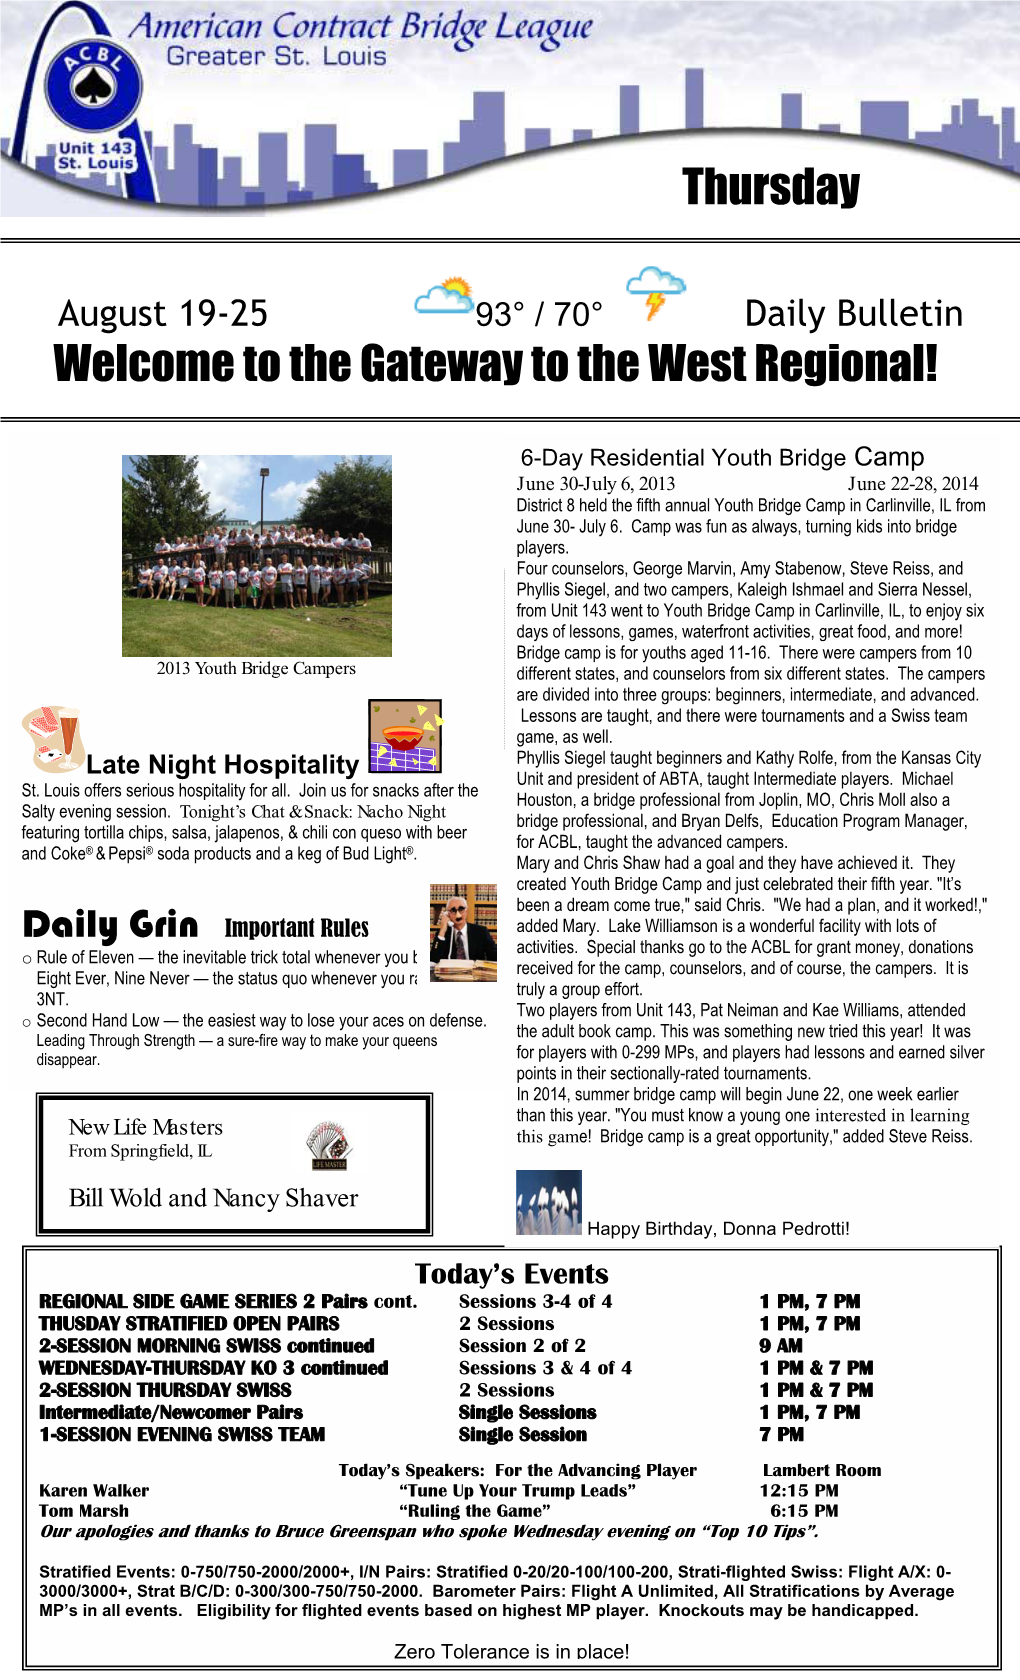 Thursday Welcome to the Gateway to the West Regional!